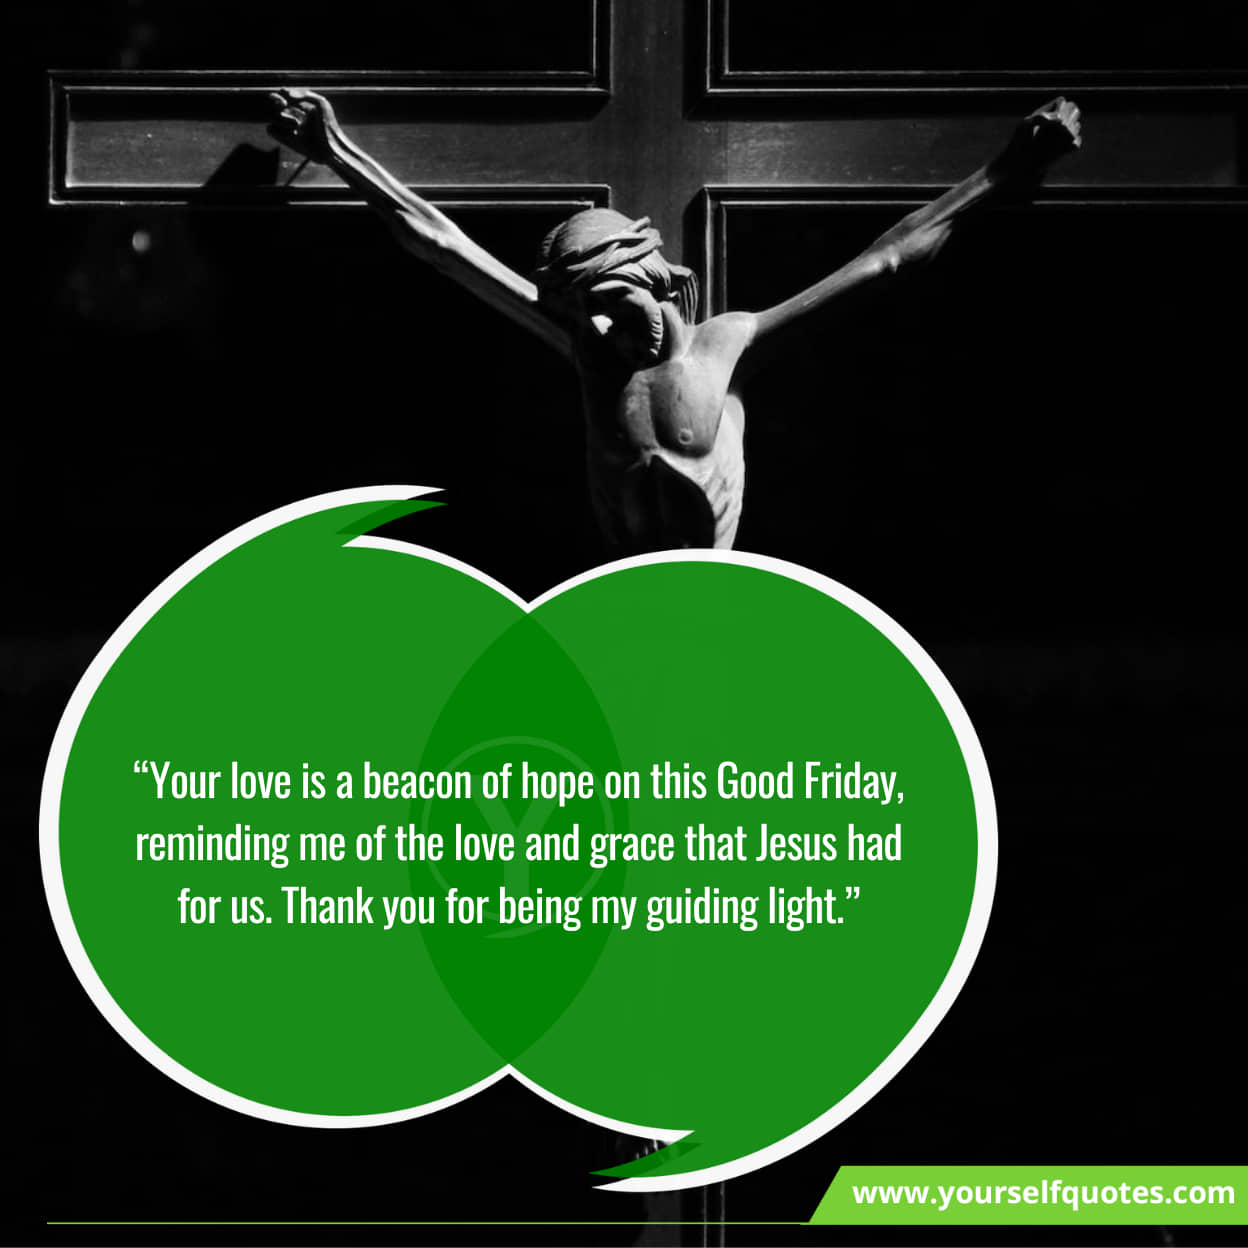 Embracing Love on Good Friday